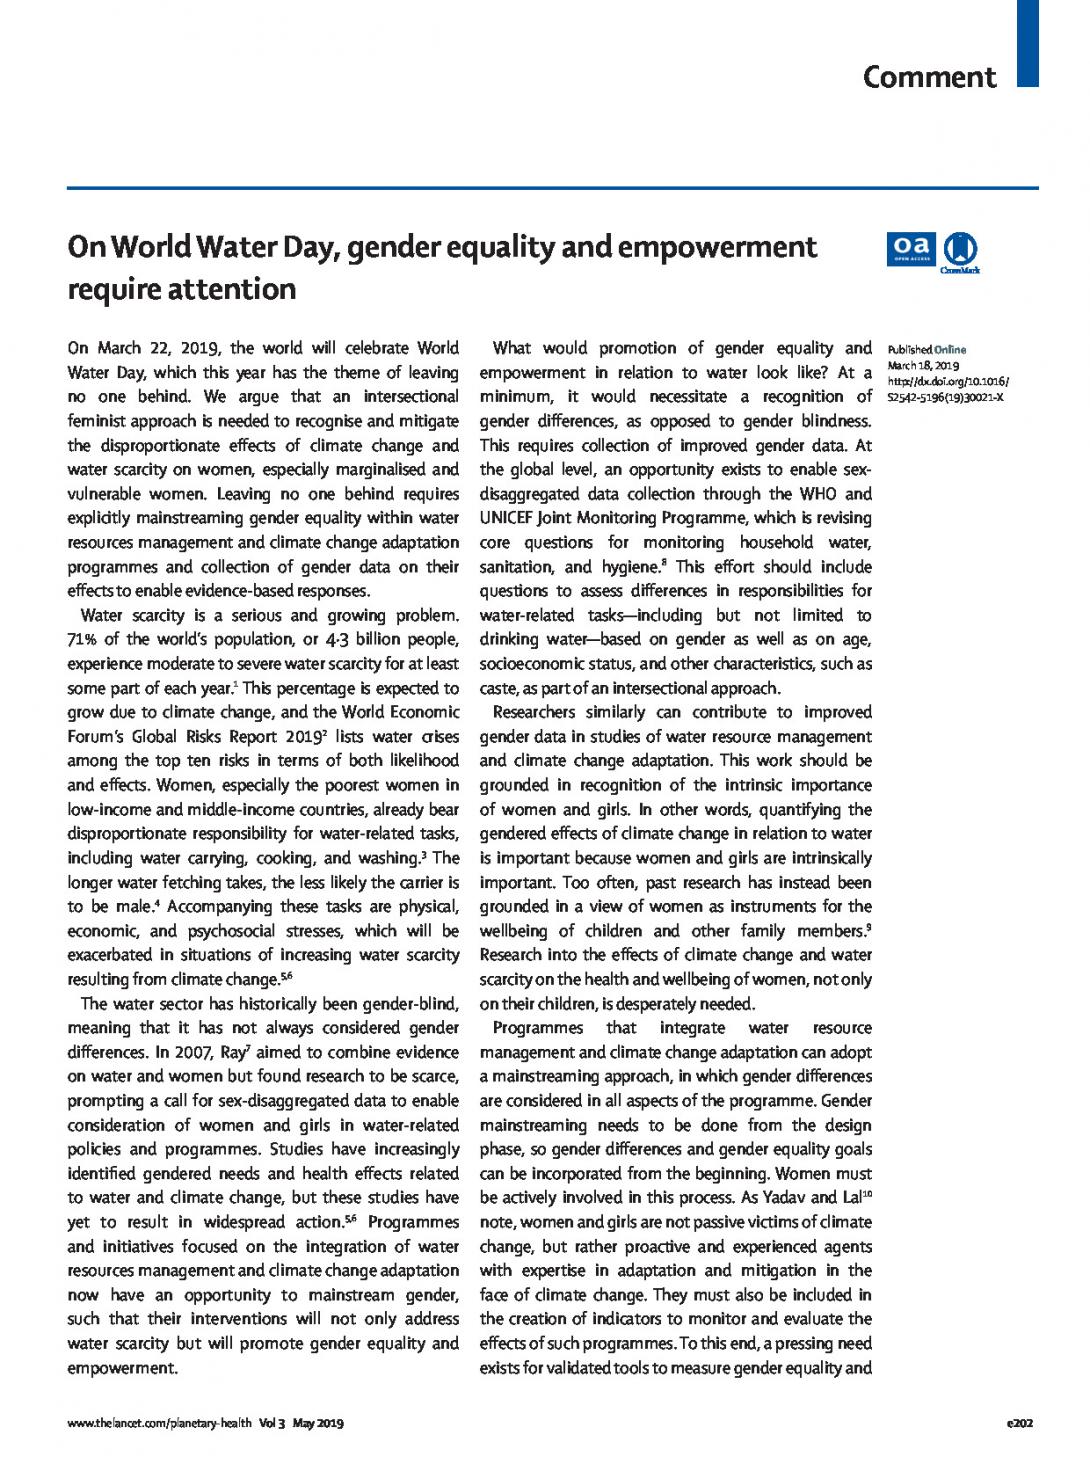 On World Water Day, gender equality and empowerment require attention